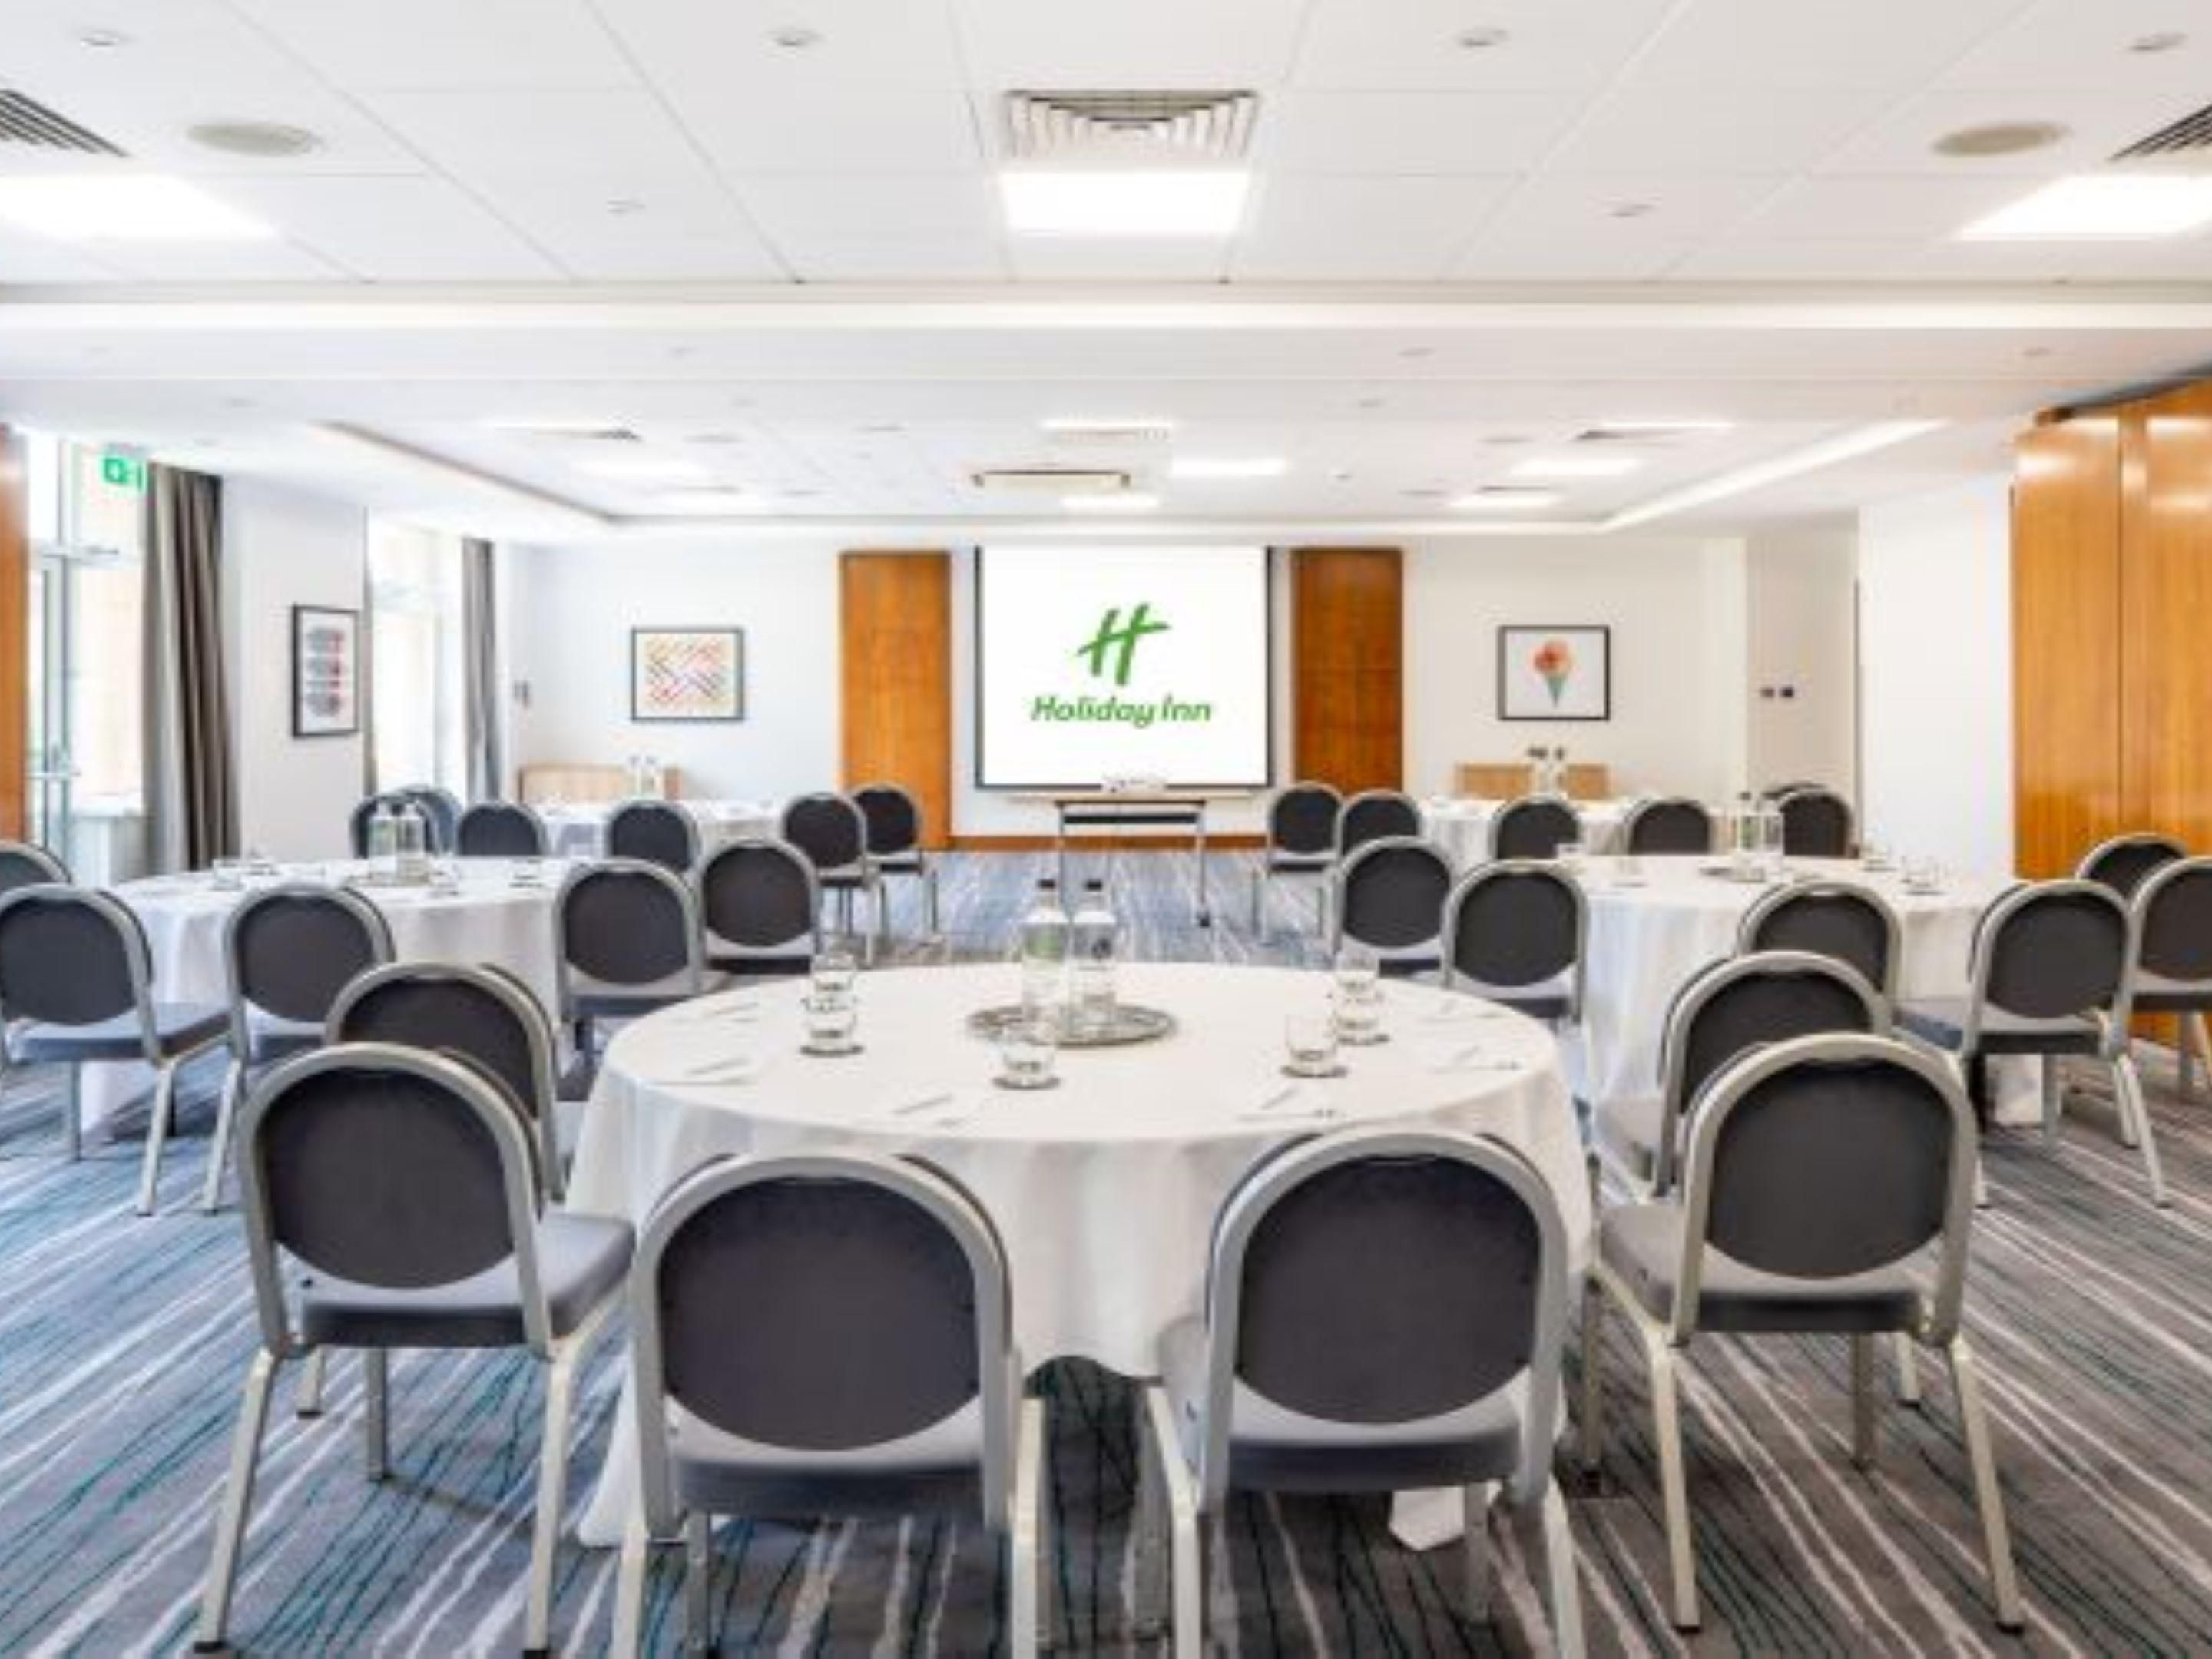 The hotel offers eight different meeting rooms, the largest of which can seat up to 90 guests banquet-style or 140 theatre-style. Natural light and free Wi-Fi will help keep your meeting productive. AV equipment and catering can also be arranged.